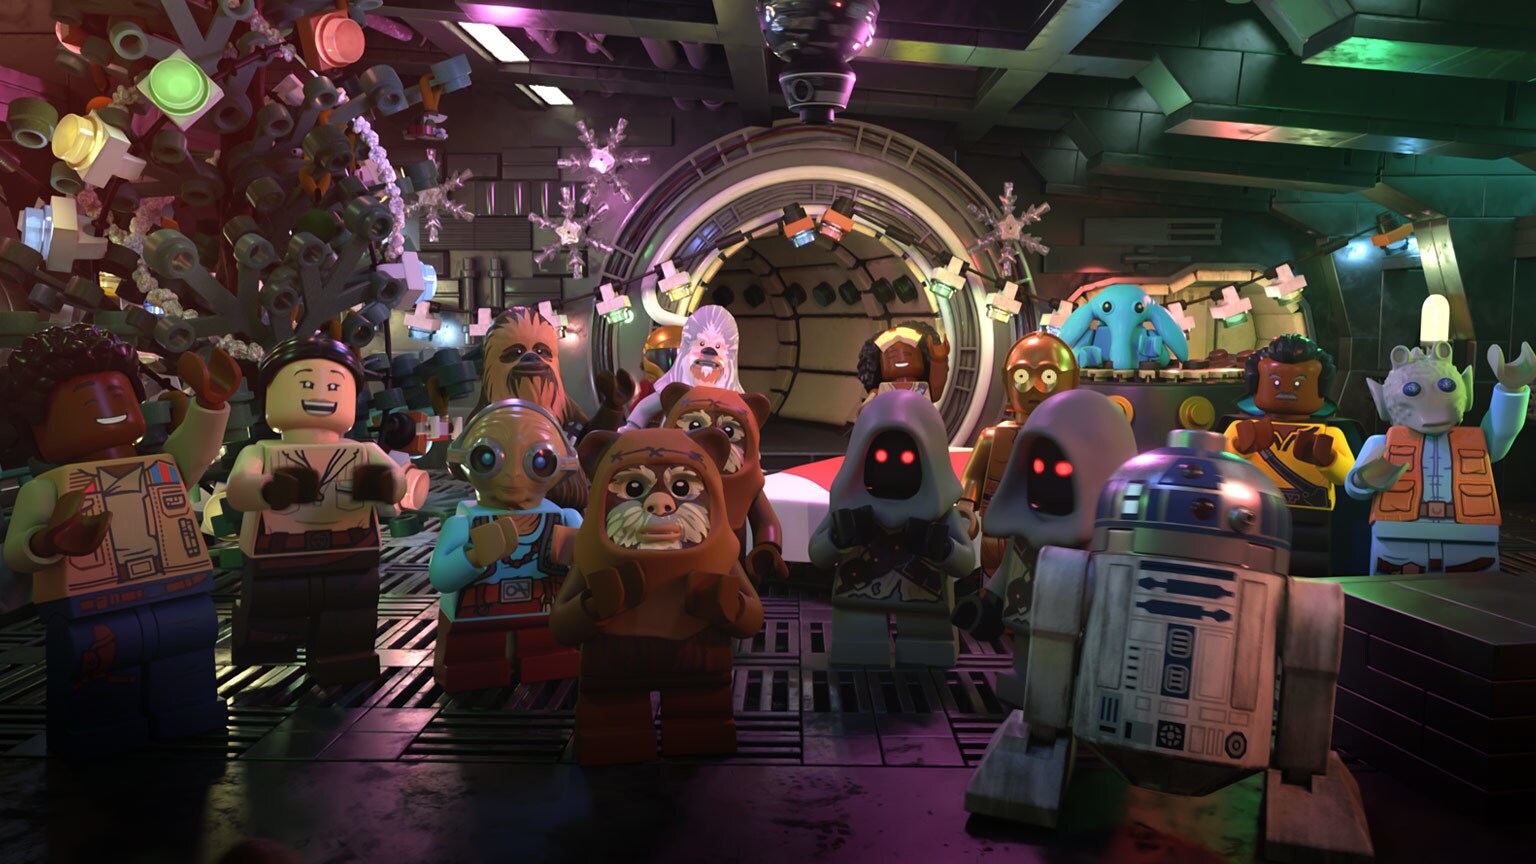 Scene for The LEGO Star Wars holiday Special